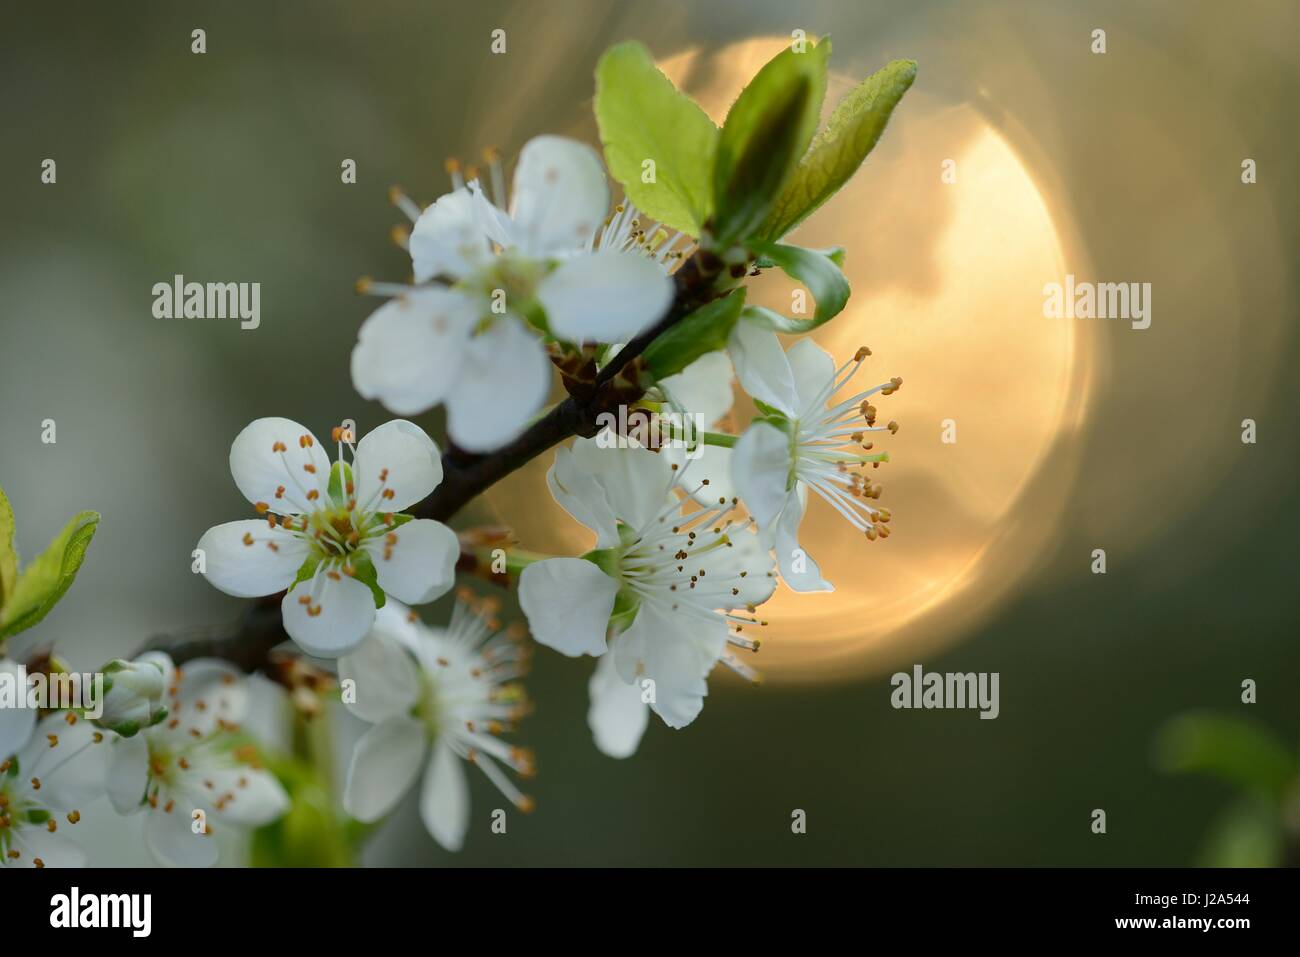 Blossom of a Plumtree in evening light Stock Photo